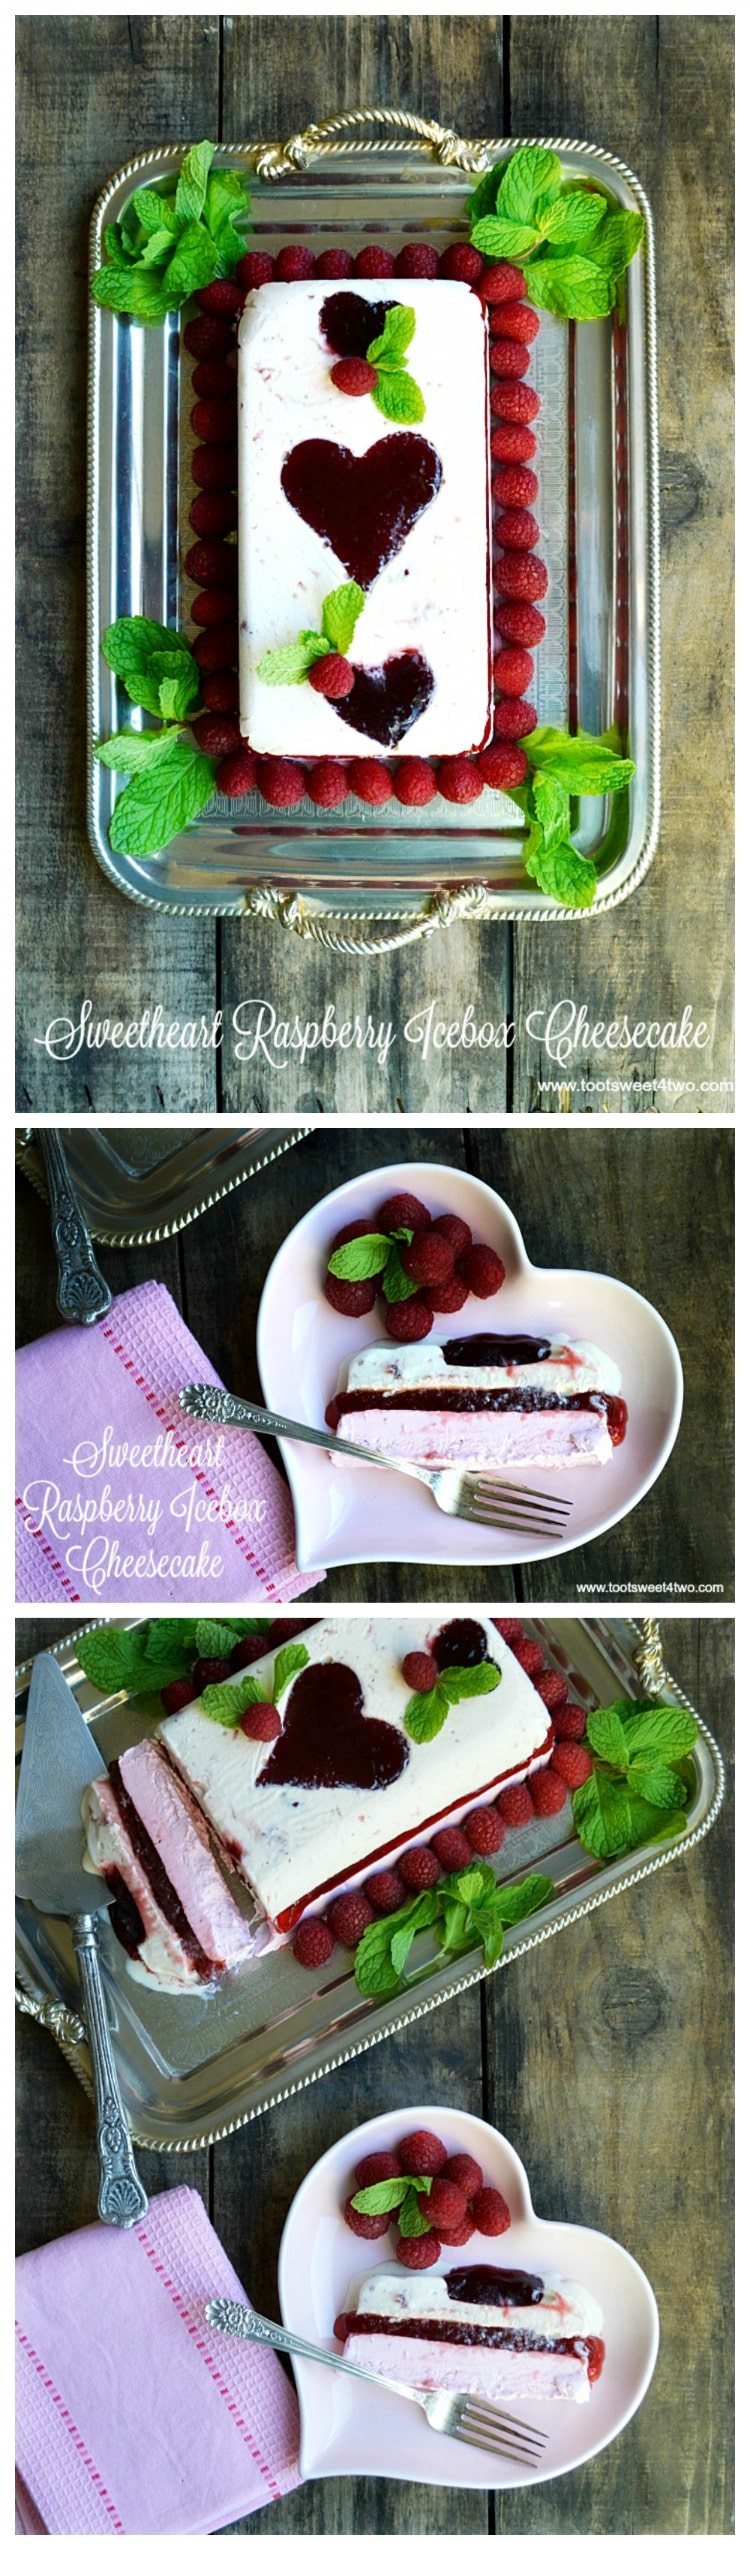 Looking for unique cheesecake recipes? Look no further! Sweetheart Raspberry Icebox Cheesecake is an easy, frozen, no bake dessert that combines an easy-to-make cheesecake layer with a layer of raspberry flavored ice cream and molded raspberry jam hearts. Frozen for hours or overnight, unmold this luscious concoction onto a pretty platter and then top with fresh raspberries and sprigs of mint. A spectacular-looking dessert, this delicious recipe with "wow" friends and family. | www.tootsweet4two.com